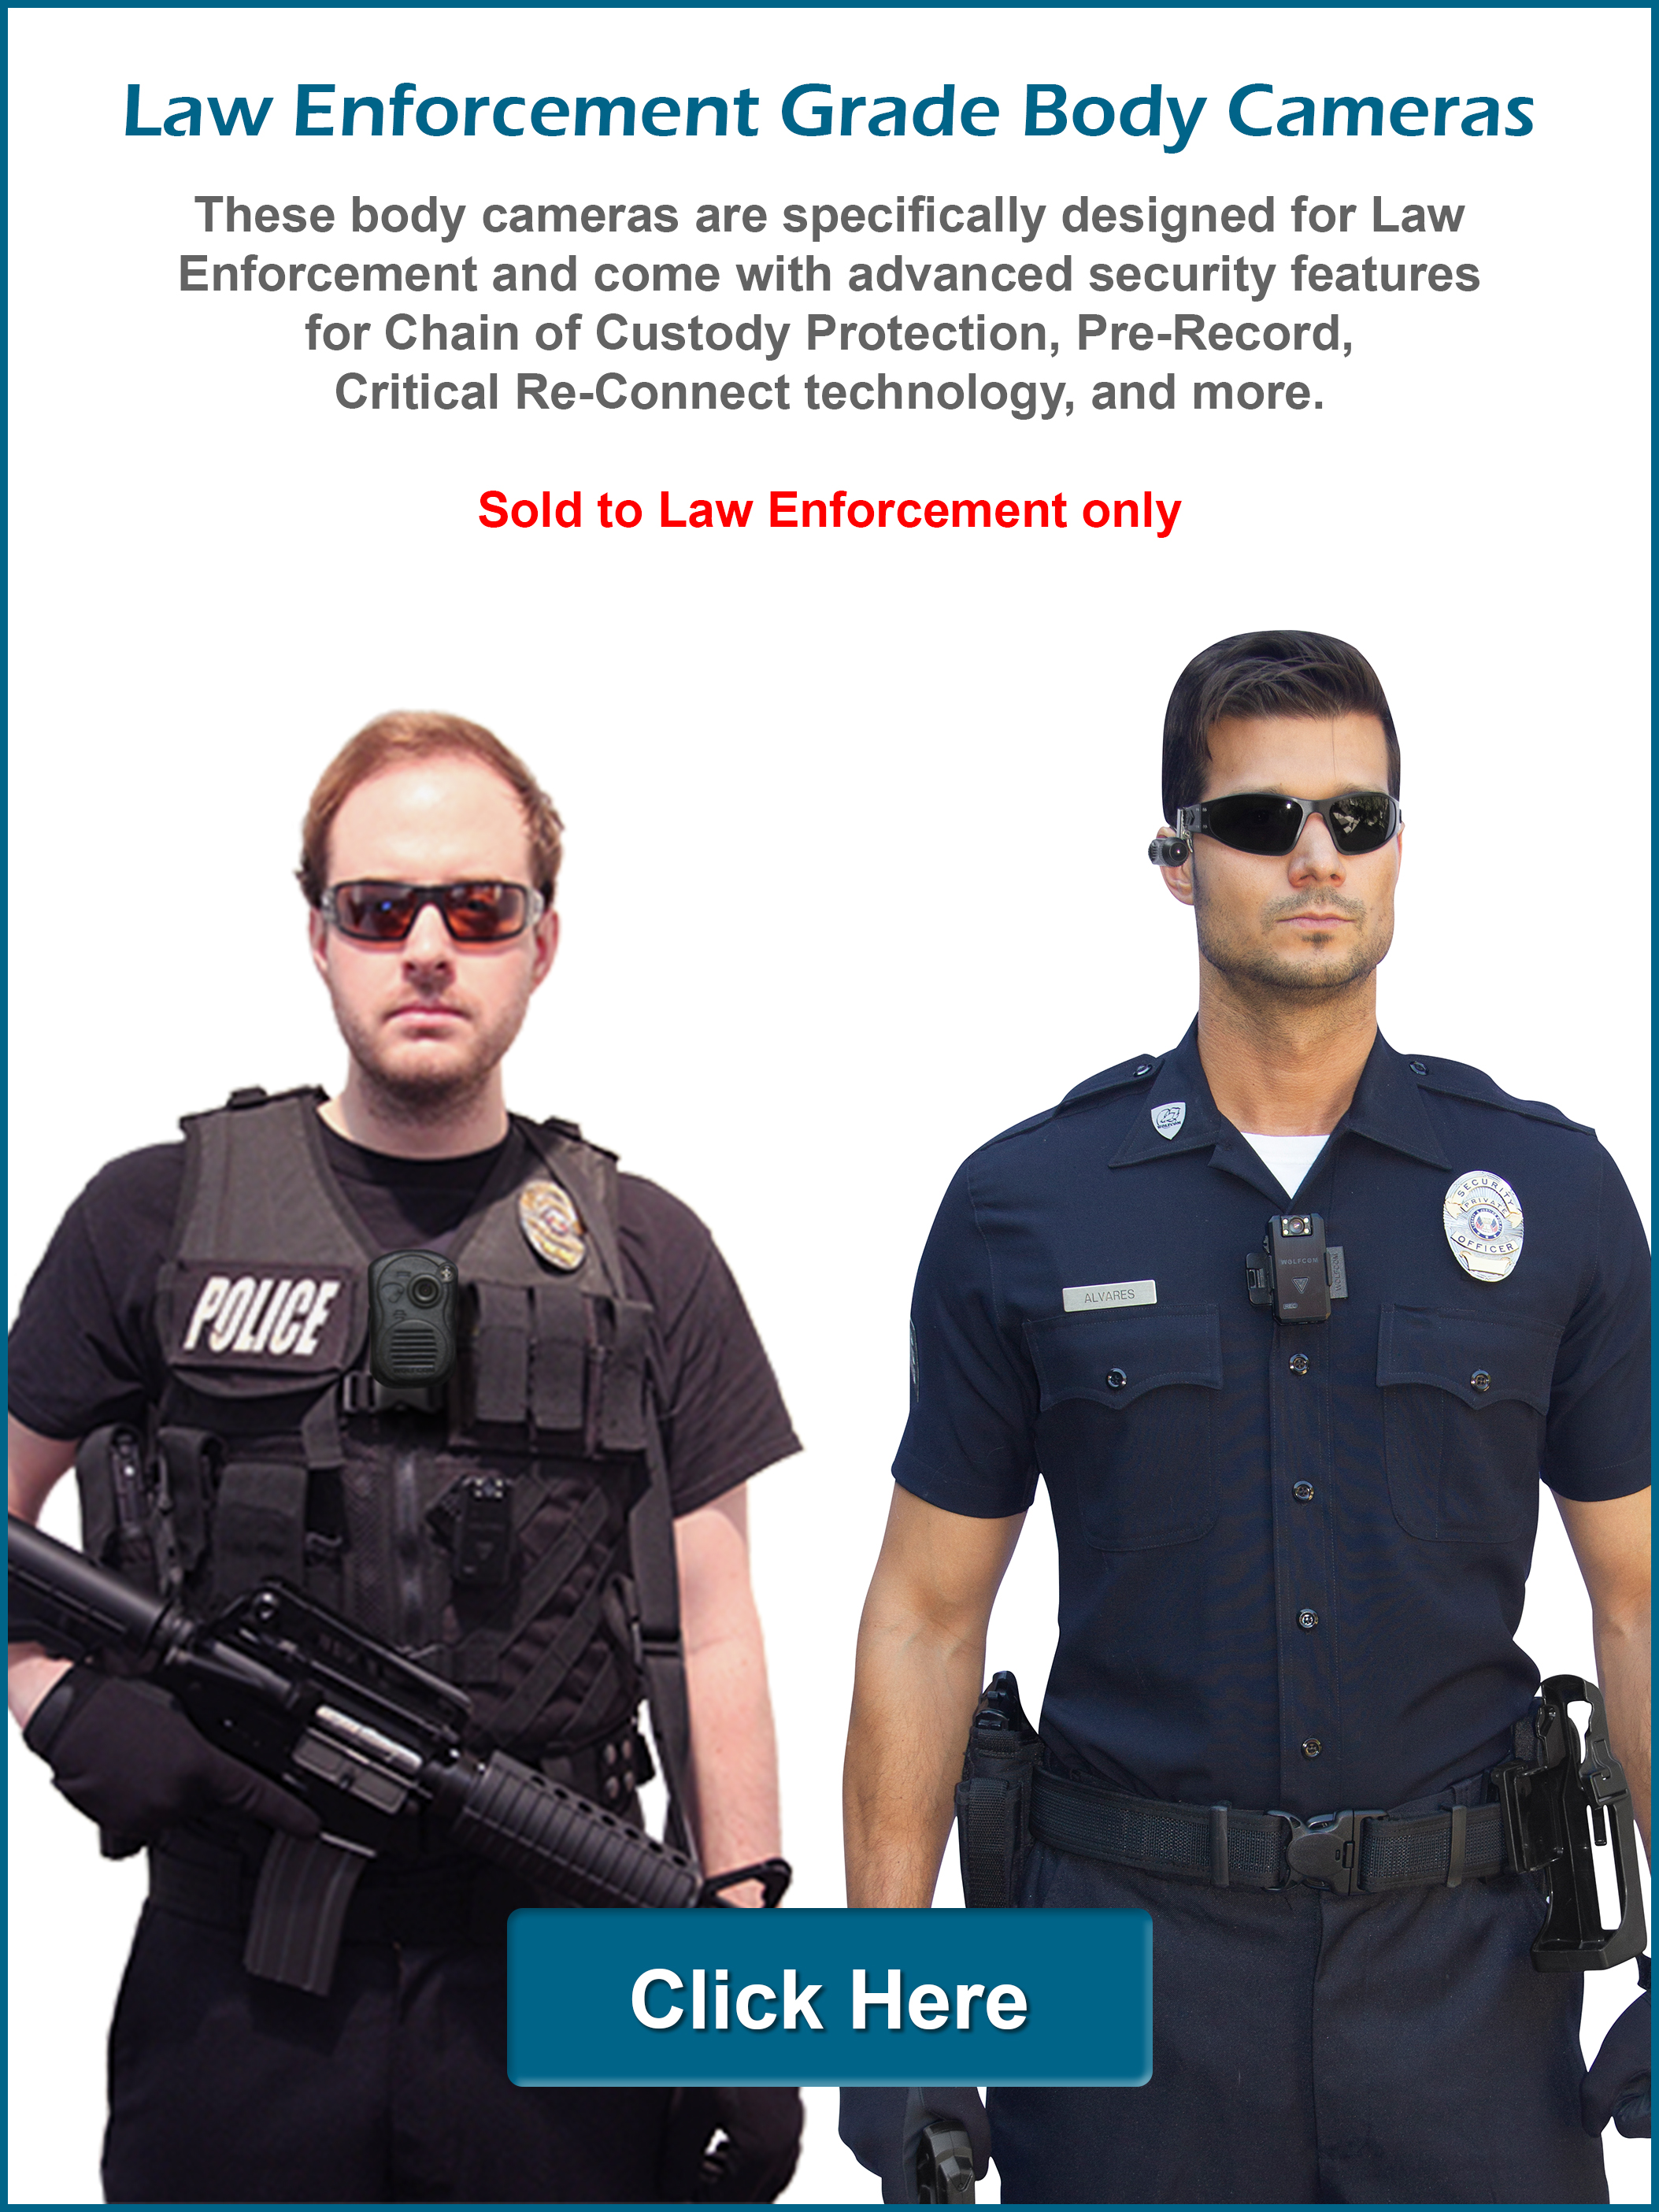 wolfcom specializes in body cameras for law enforcement